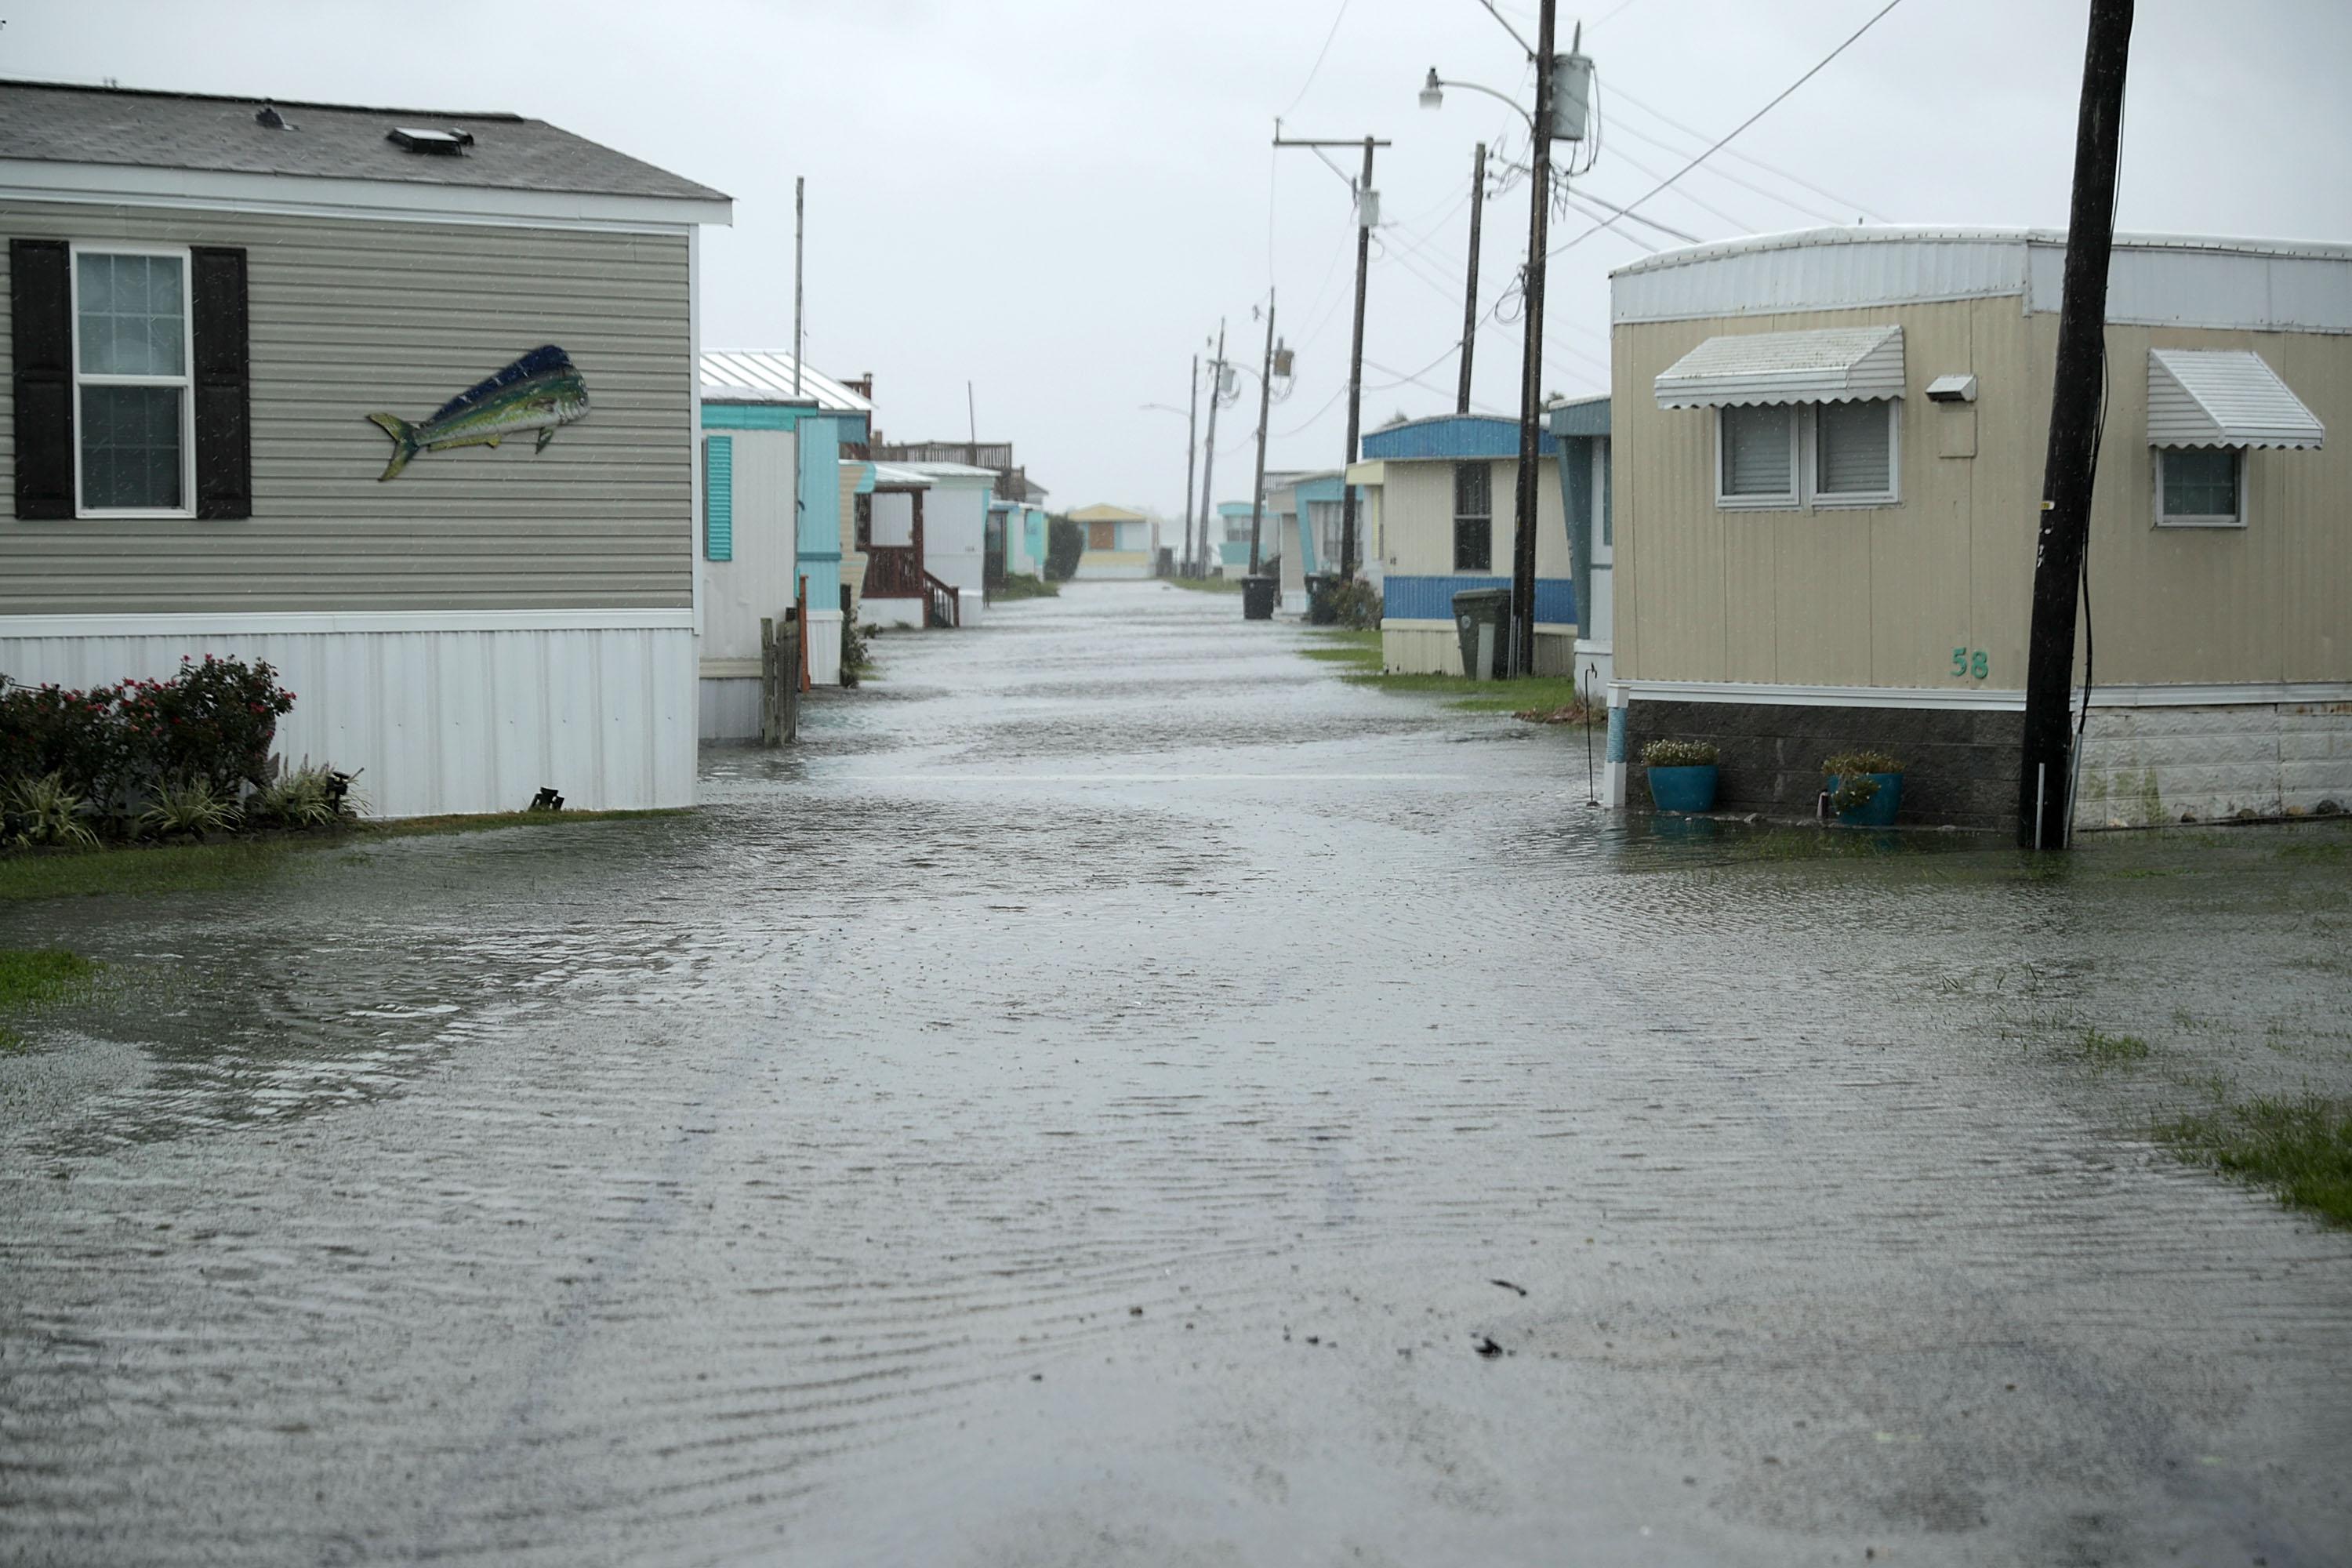 Flash flooding covers the road in low-lying areas in Atlantic Beach, N.C., as the outer edges of Hurricane Florence begin to affect the coast on Thursday.